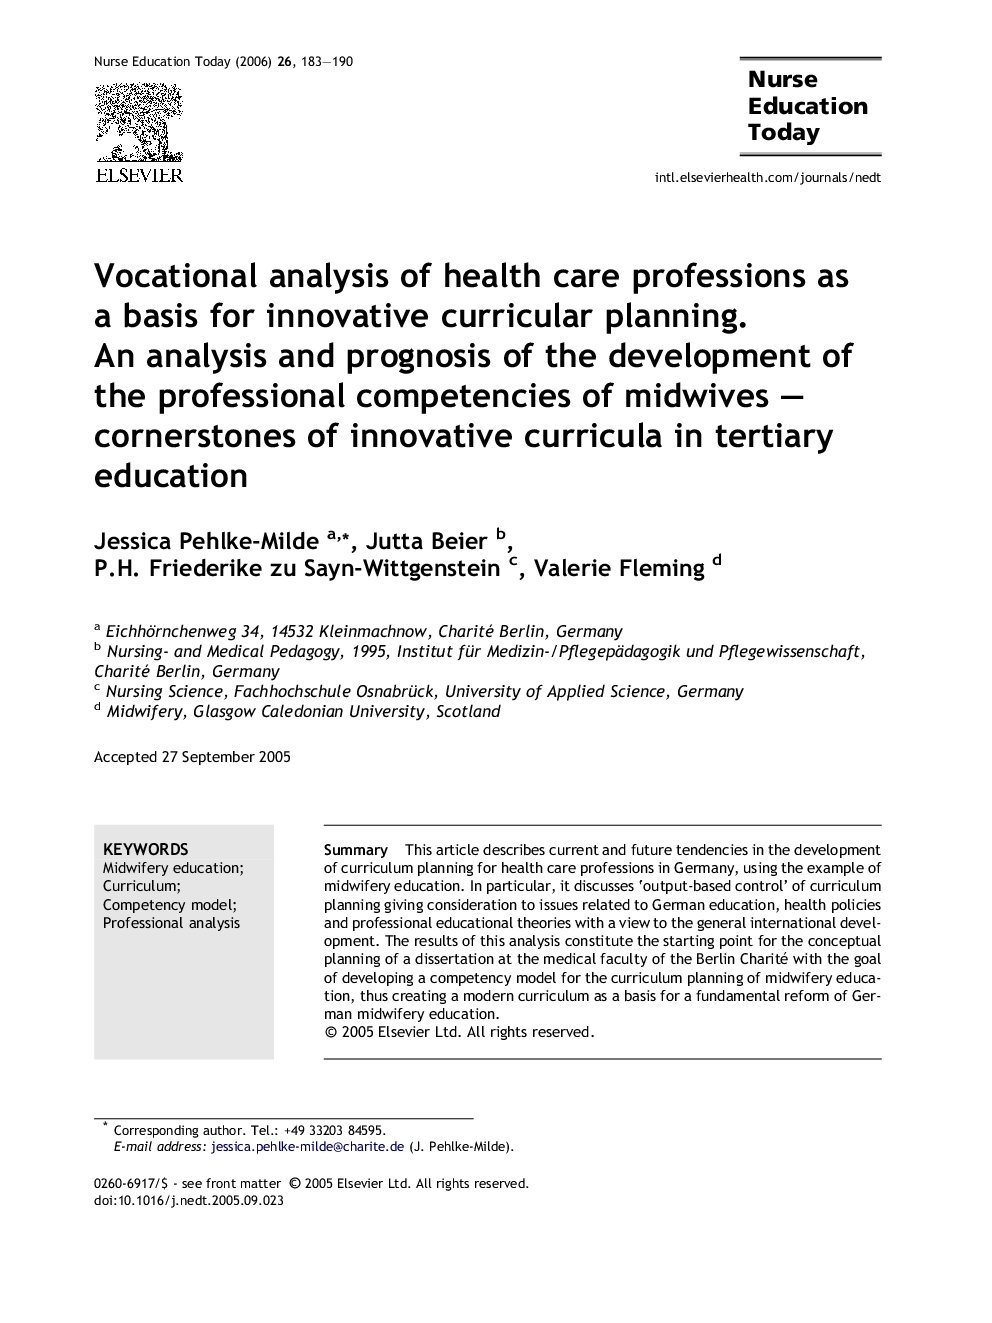 Vocational analysis of health care professions as a basis for innovative curricular planning.: An analysis and prognosis of the development of the professional competencies of midwives – cornerstones of innovative curricula in tertiary education